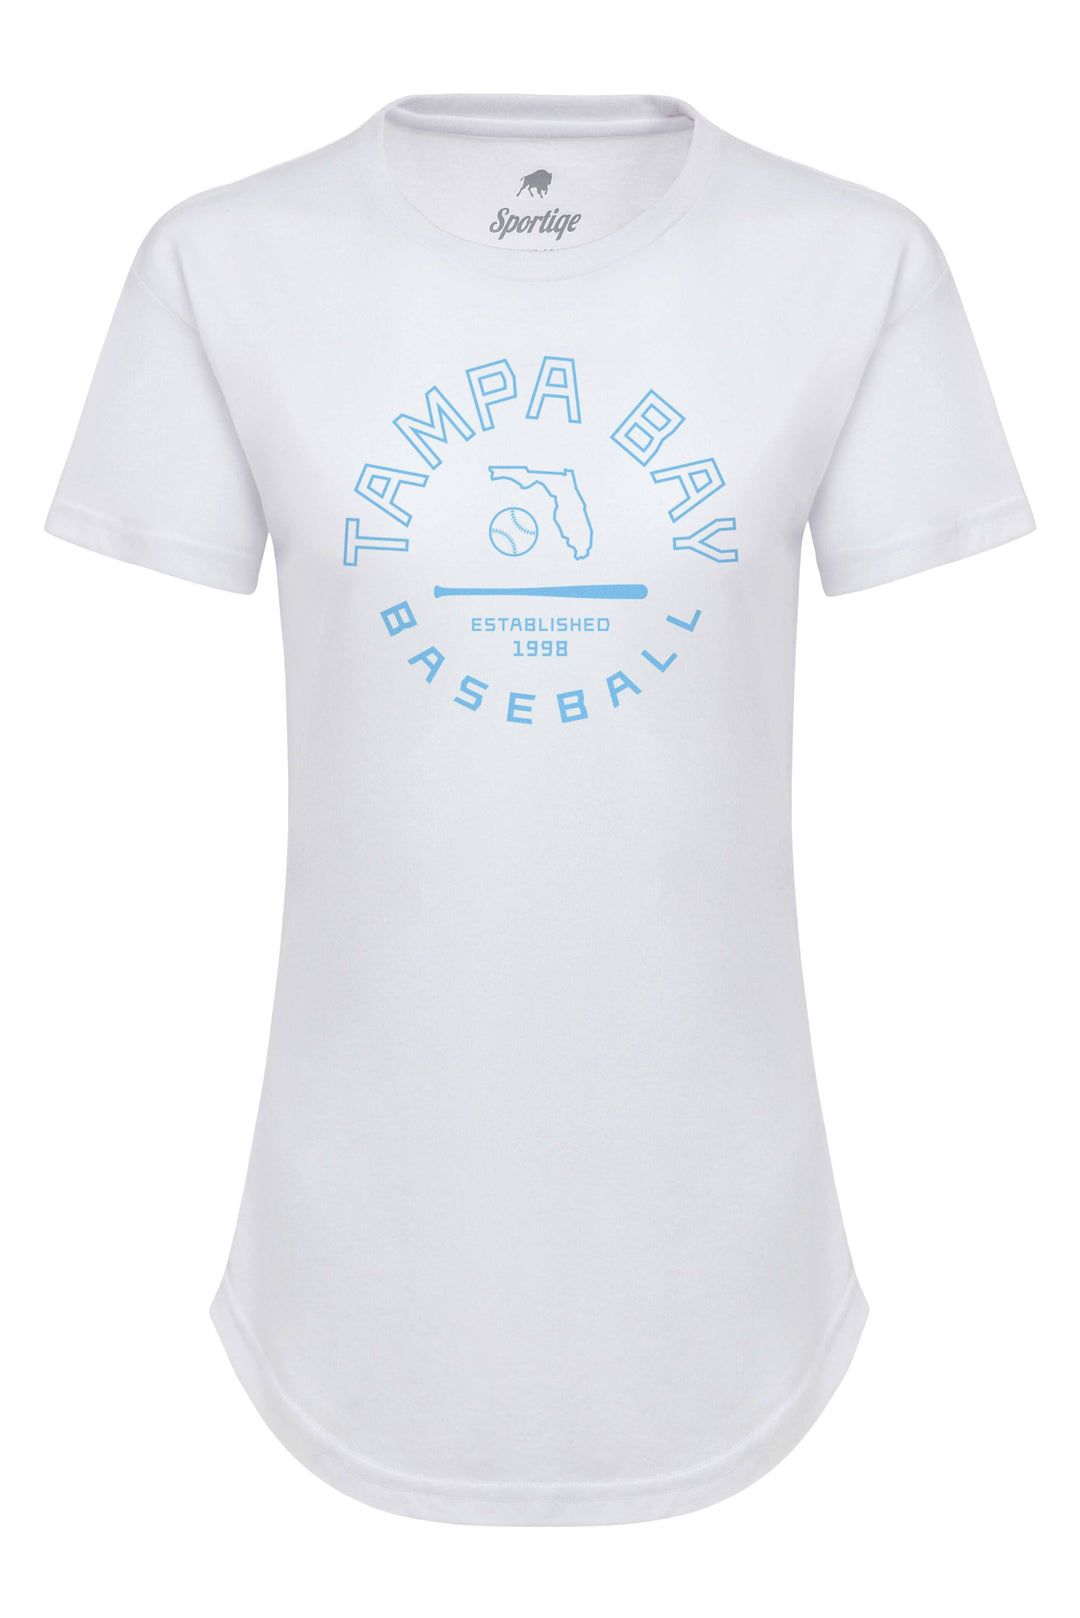 WOMEN'S WHITE TAMPA BAY BASEBALL EST 1998 SPORTIQE T-SHIRT - The Bay Republic | Team Store of the Tampa Bay Rays & Rowdies